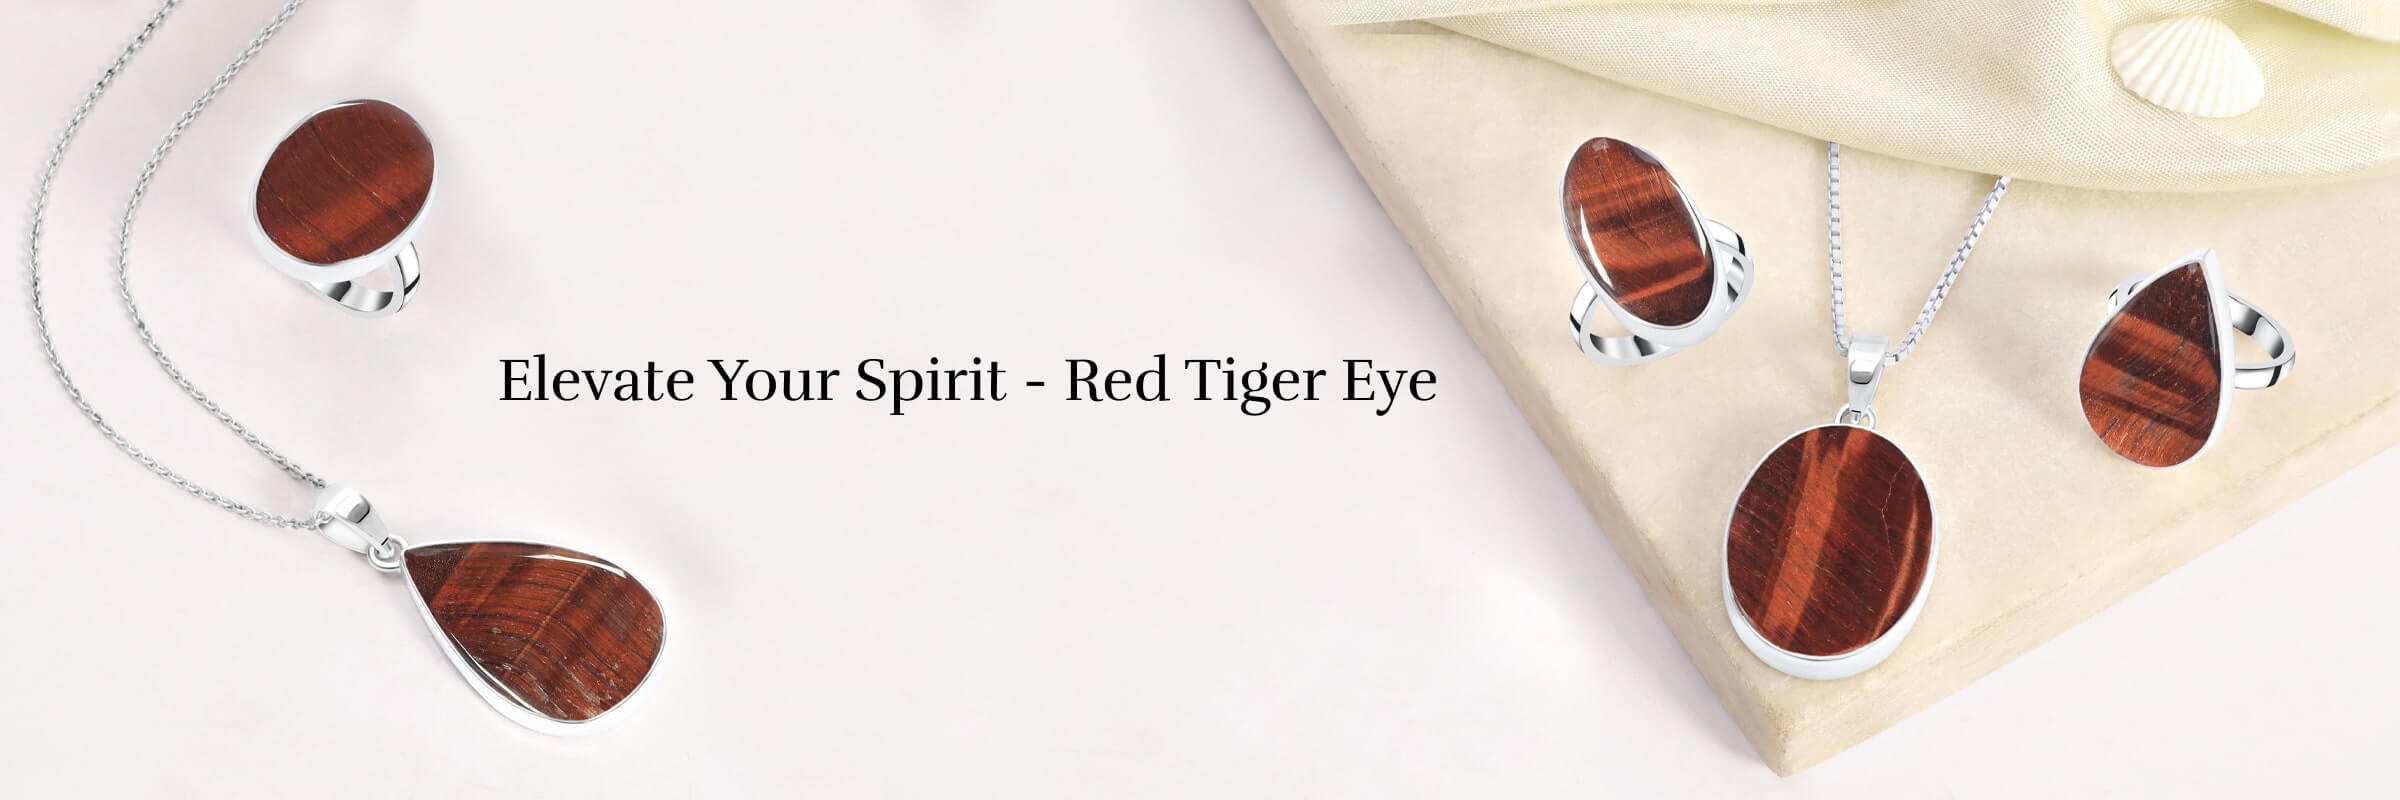 In Which Ways You Can Use Red Tiger Eye Crystal?